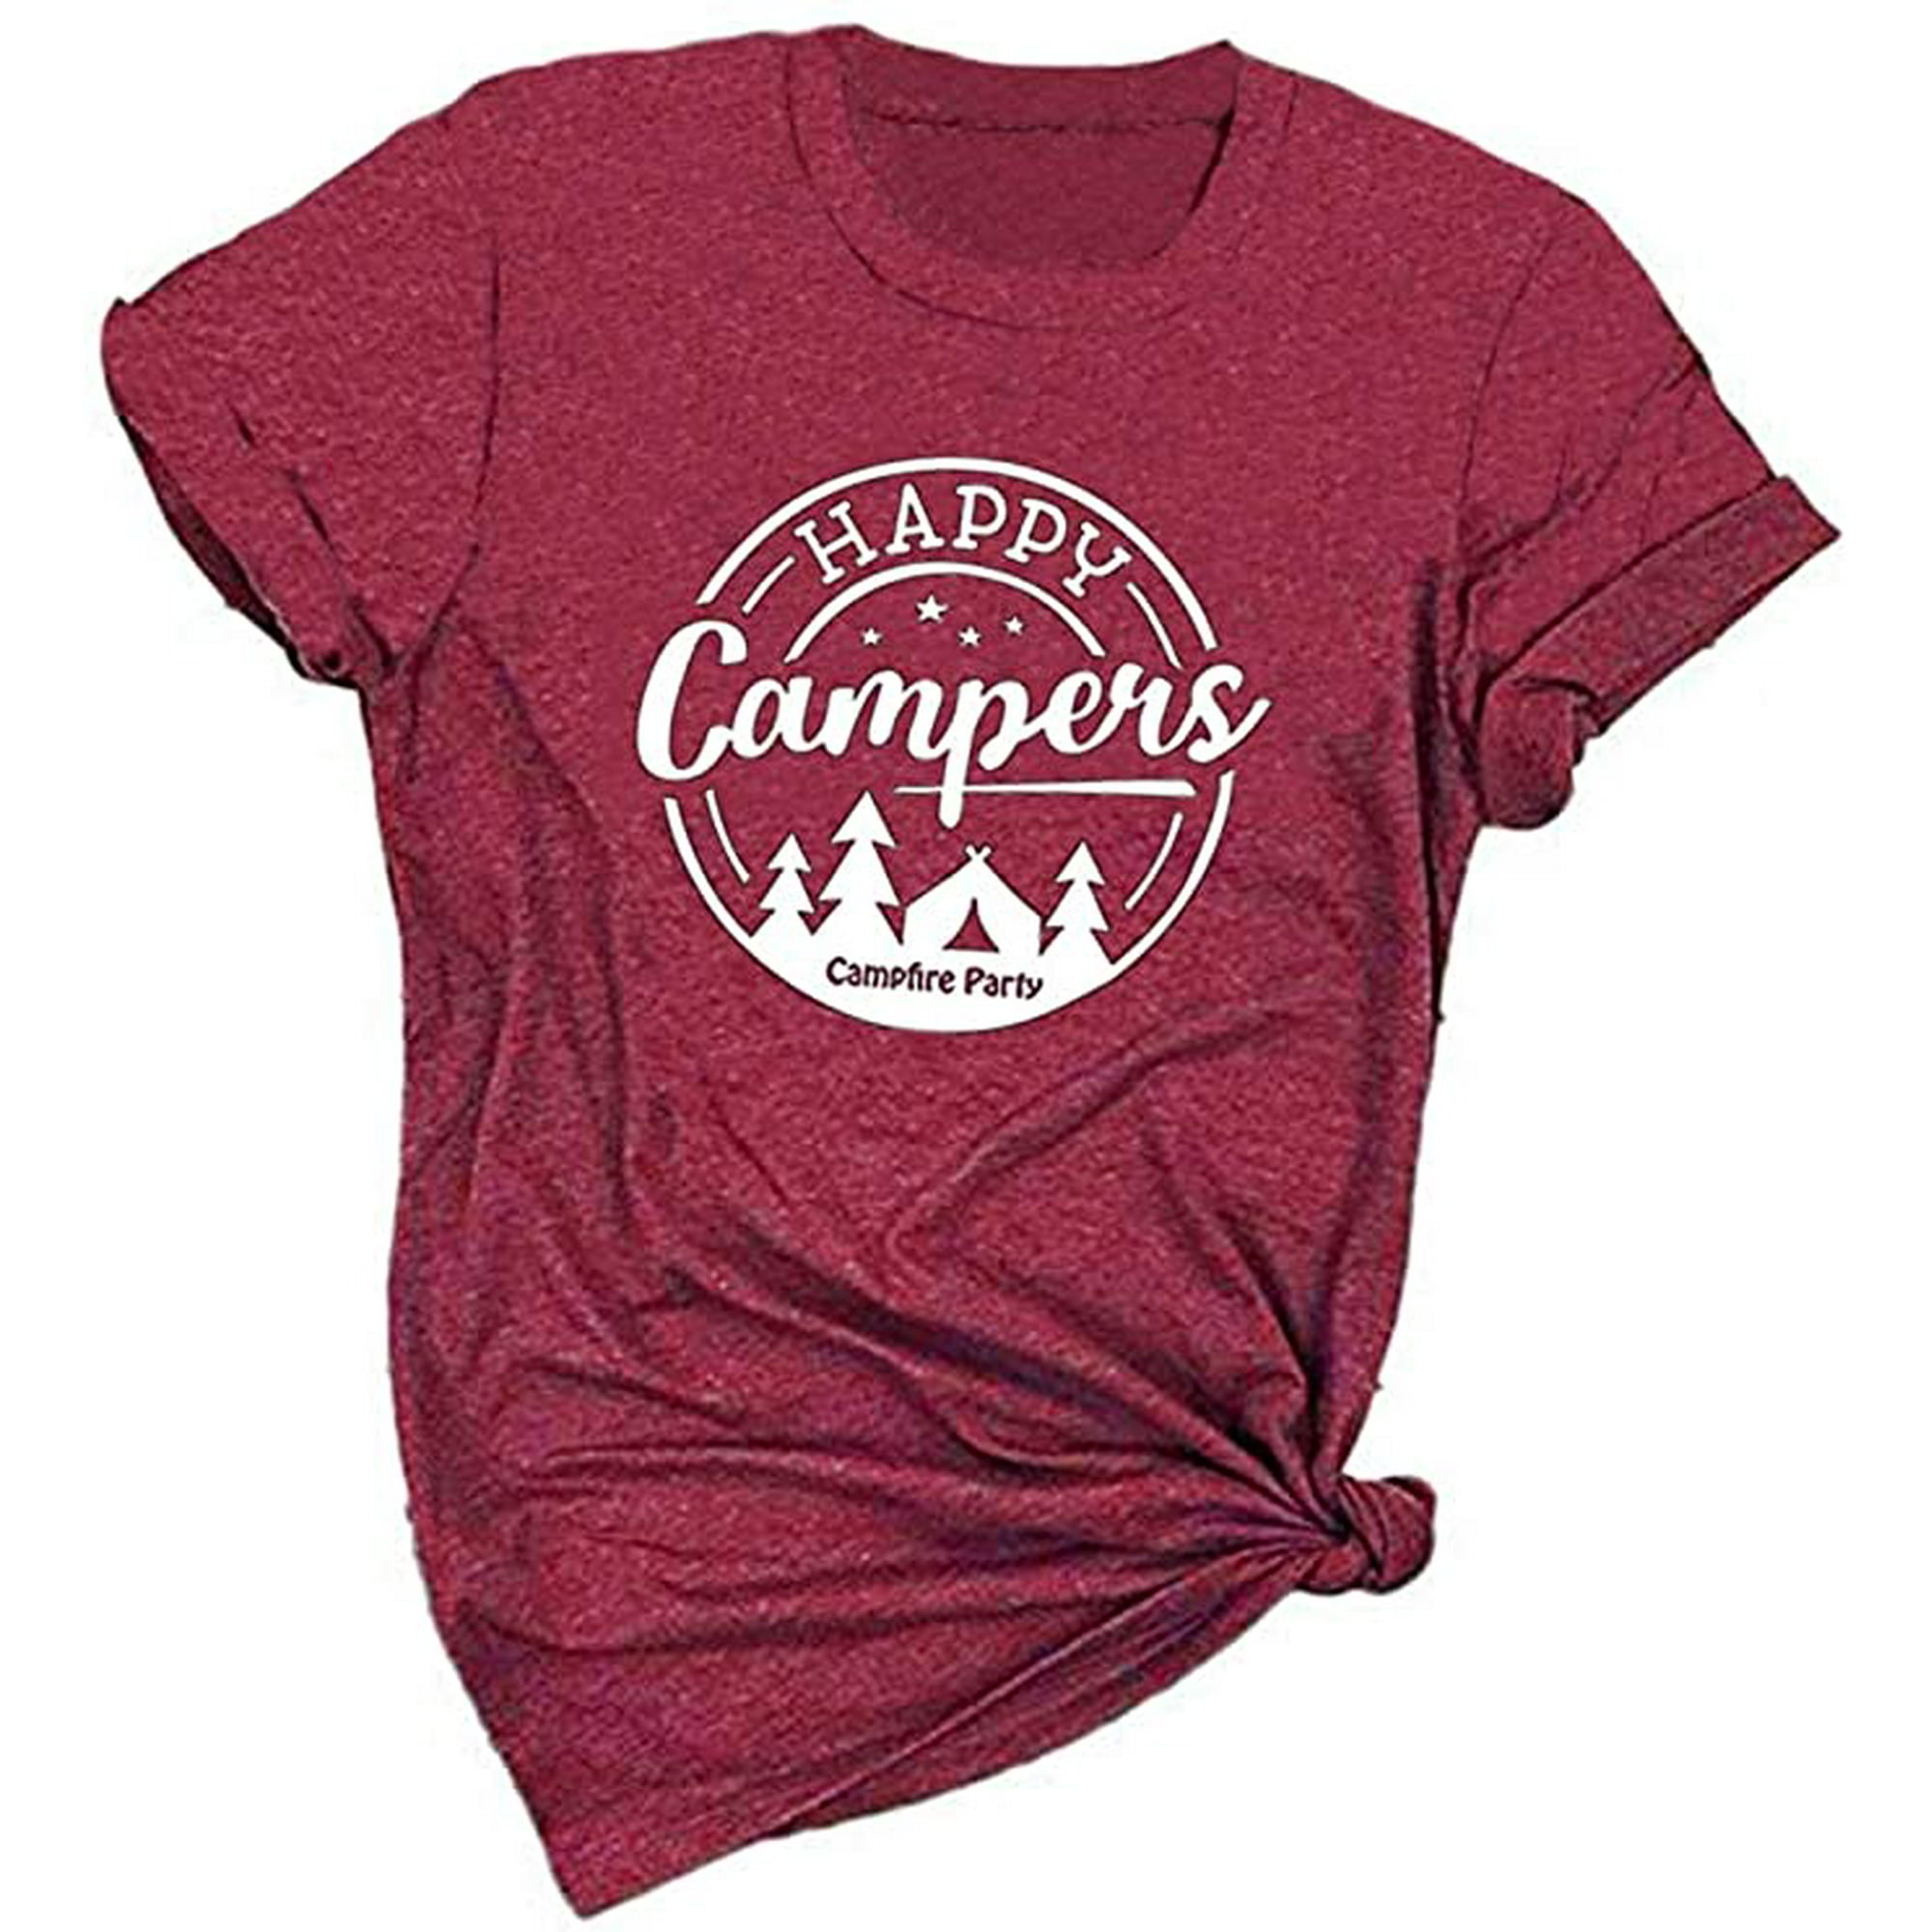 YourTops Women Happy Camper T-Shirt Camping Shirt (US 2XL, 3-Wine Red)